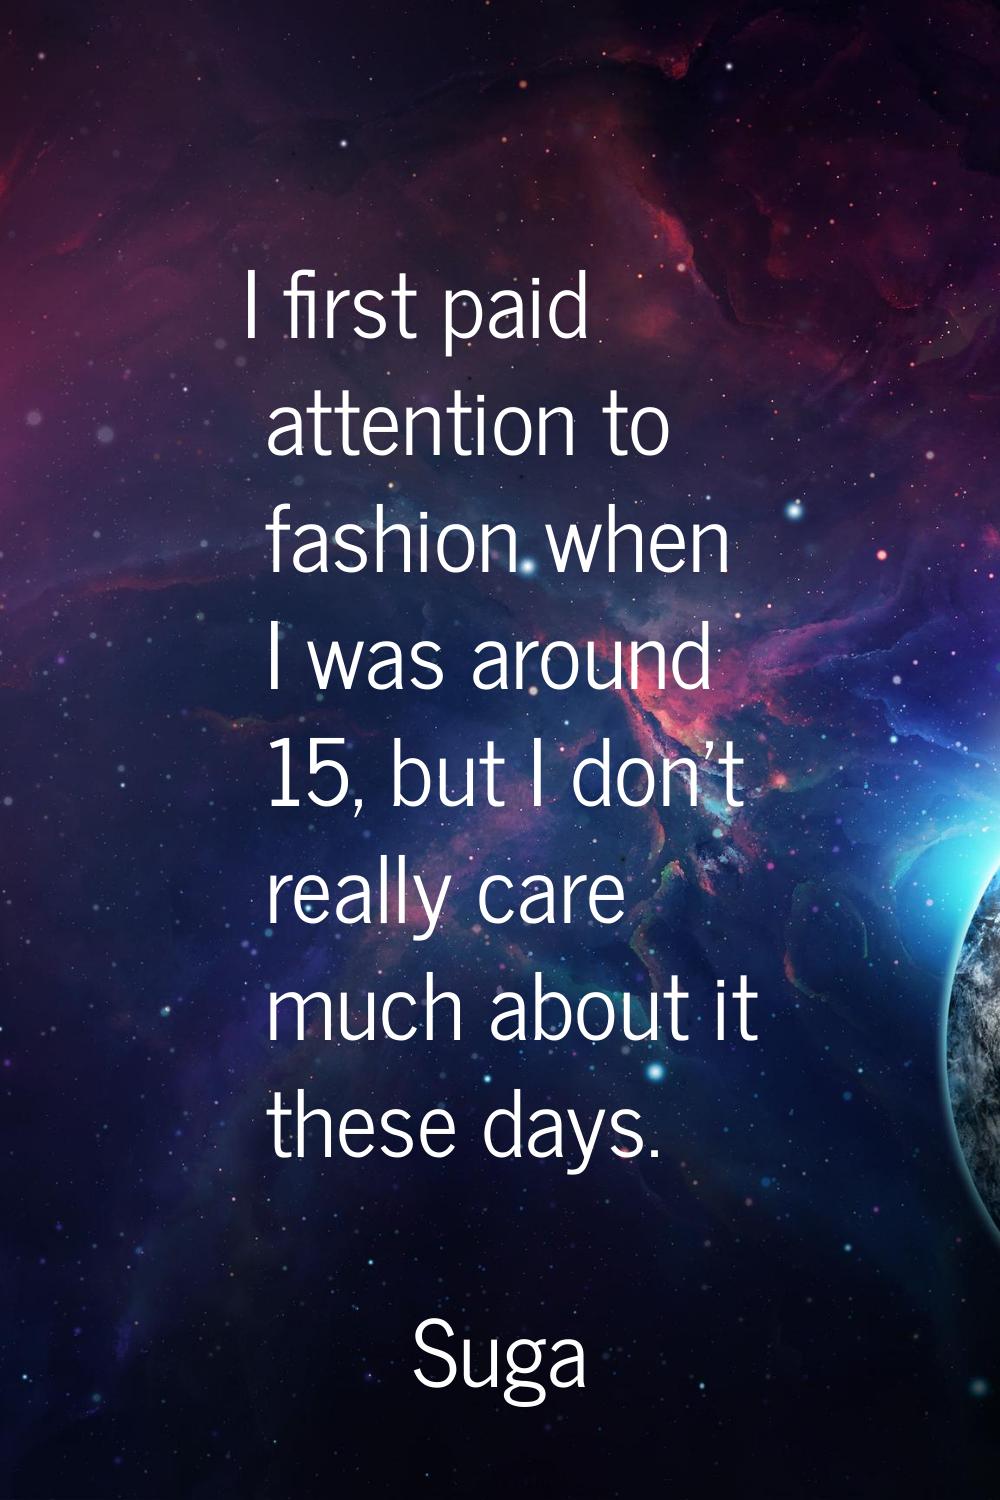 I first paid attention to fashion when I was around 15, but I don't really care much about it these